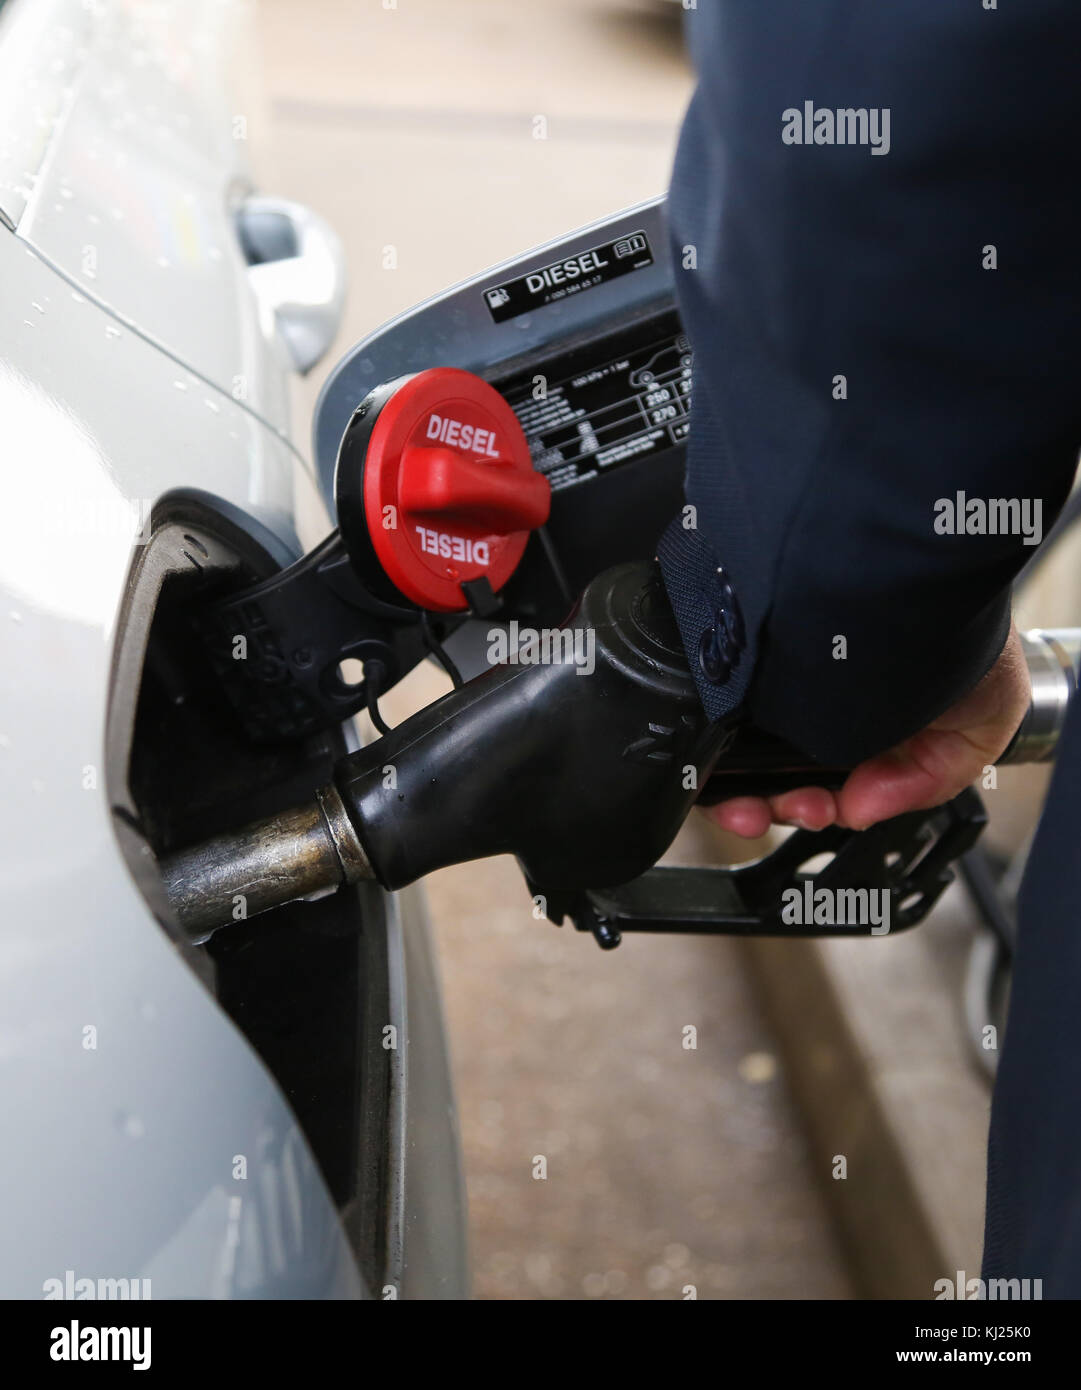 North London. UK 21 Nov 2017 - A driver filling his car with motor fuel pump in a North London petrol station forecourt as Britain's Chancellor of the Exchequer Philip Hammond is expected to announce an increase in motor fuel tax in his autumn budget on Wednesday, 22 November 2017. Stock Photo